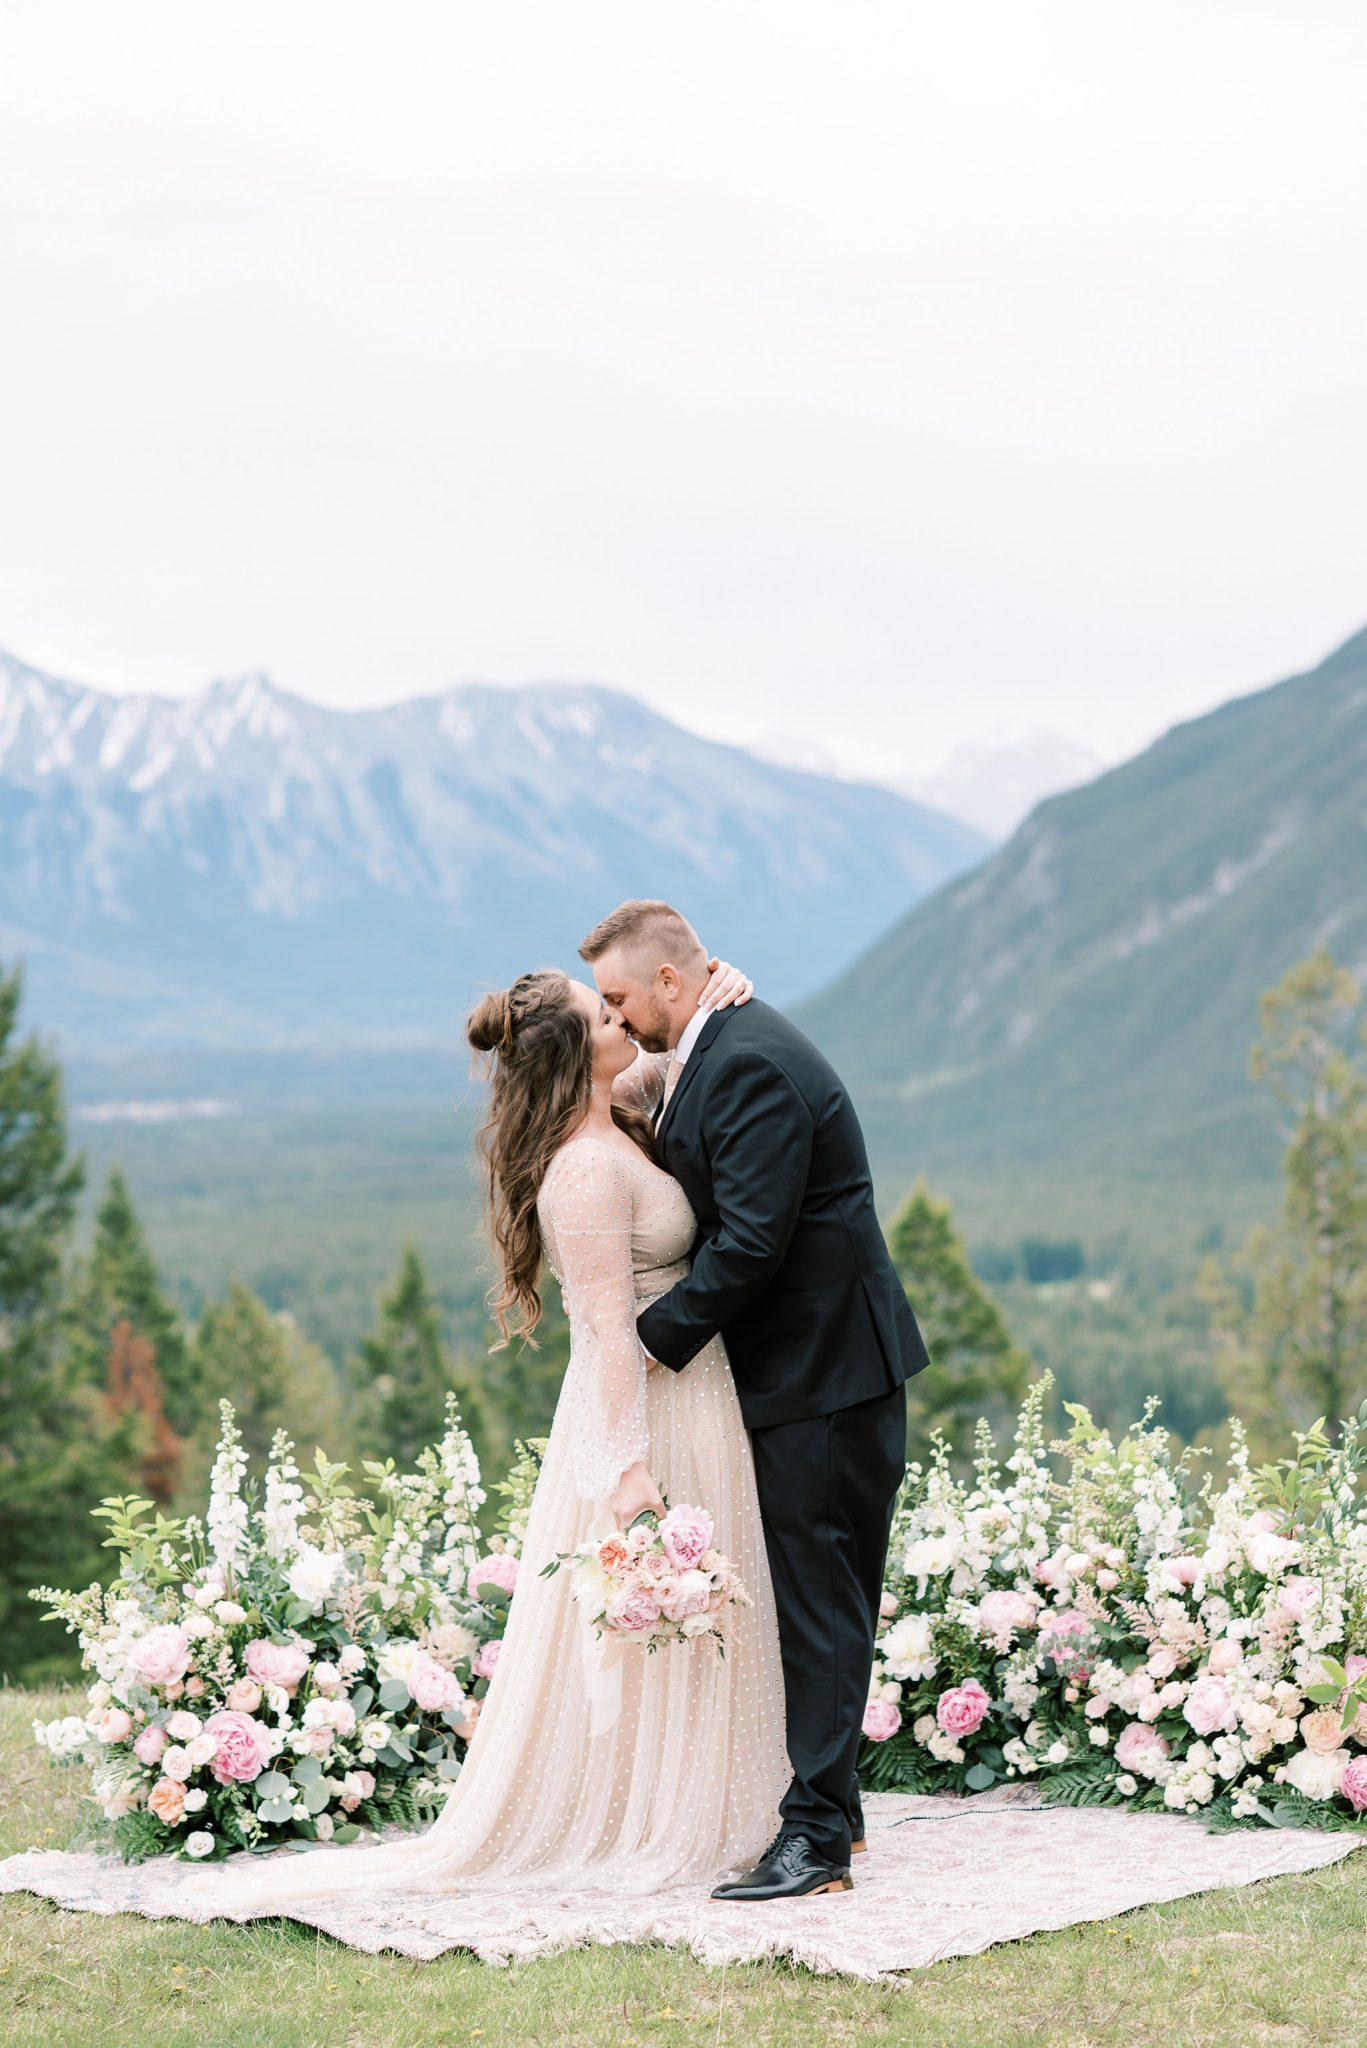 Newly eloped bride and groom share a kiss with the mountains of Banff National Park in the background